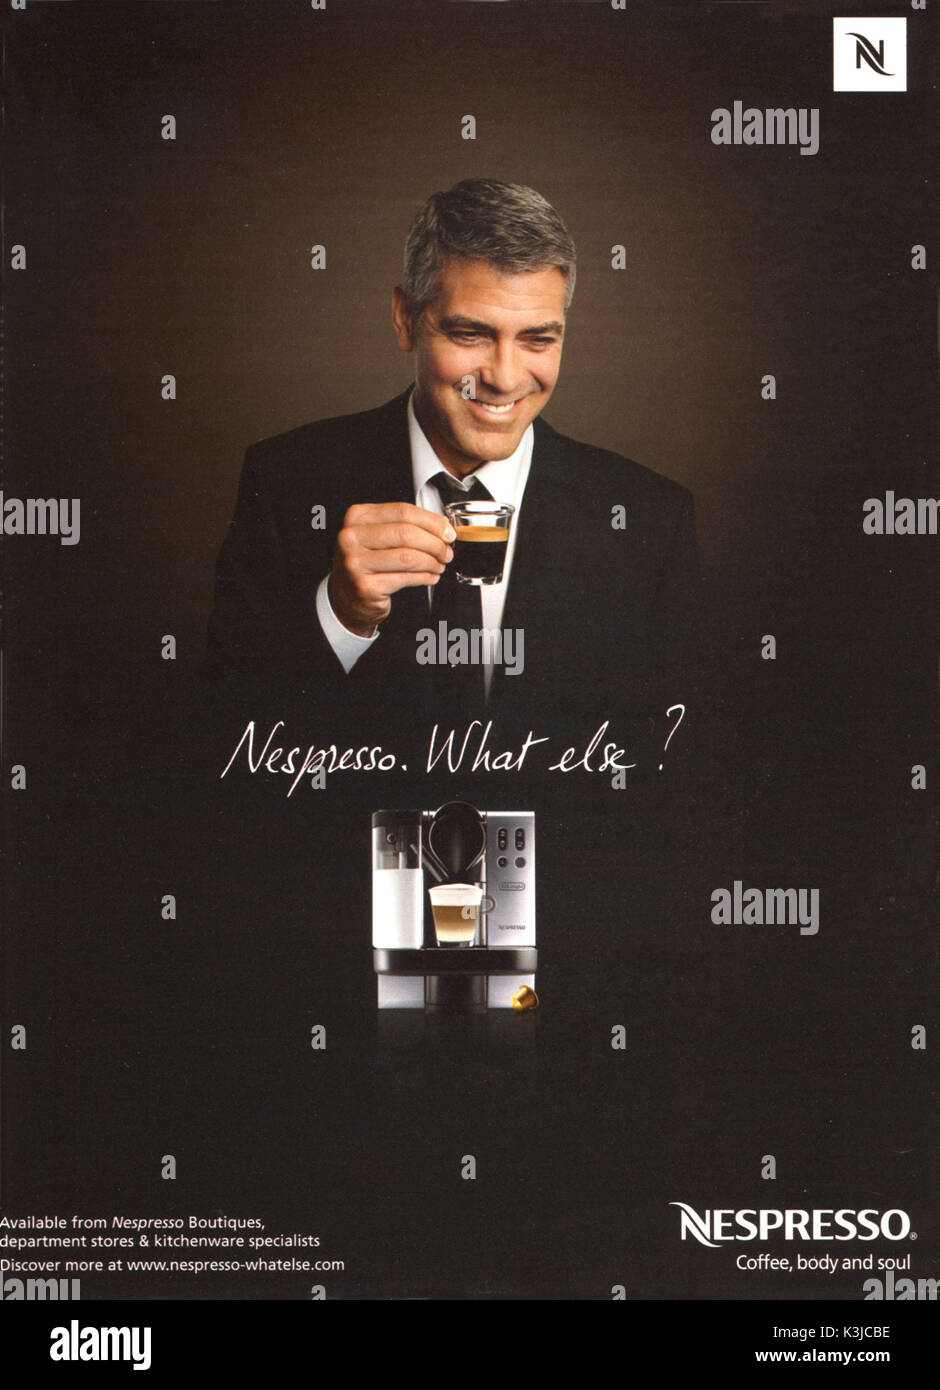 Nespresso George Clooney High Resolution Stock Photography and Images -  Alamy